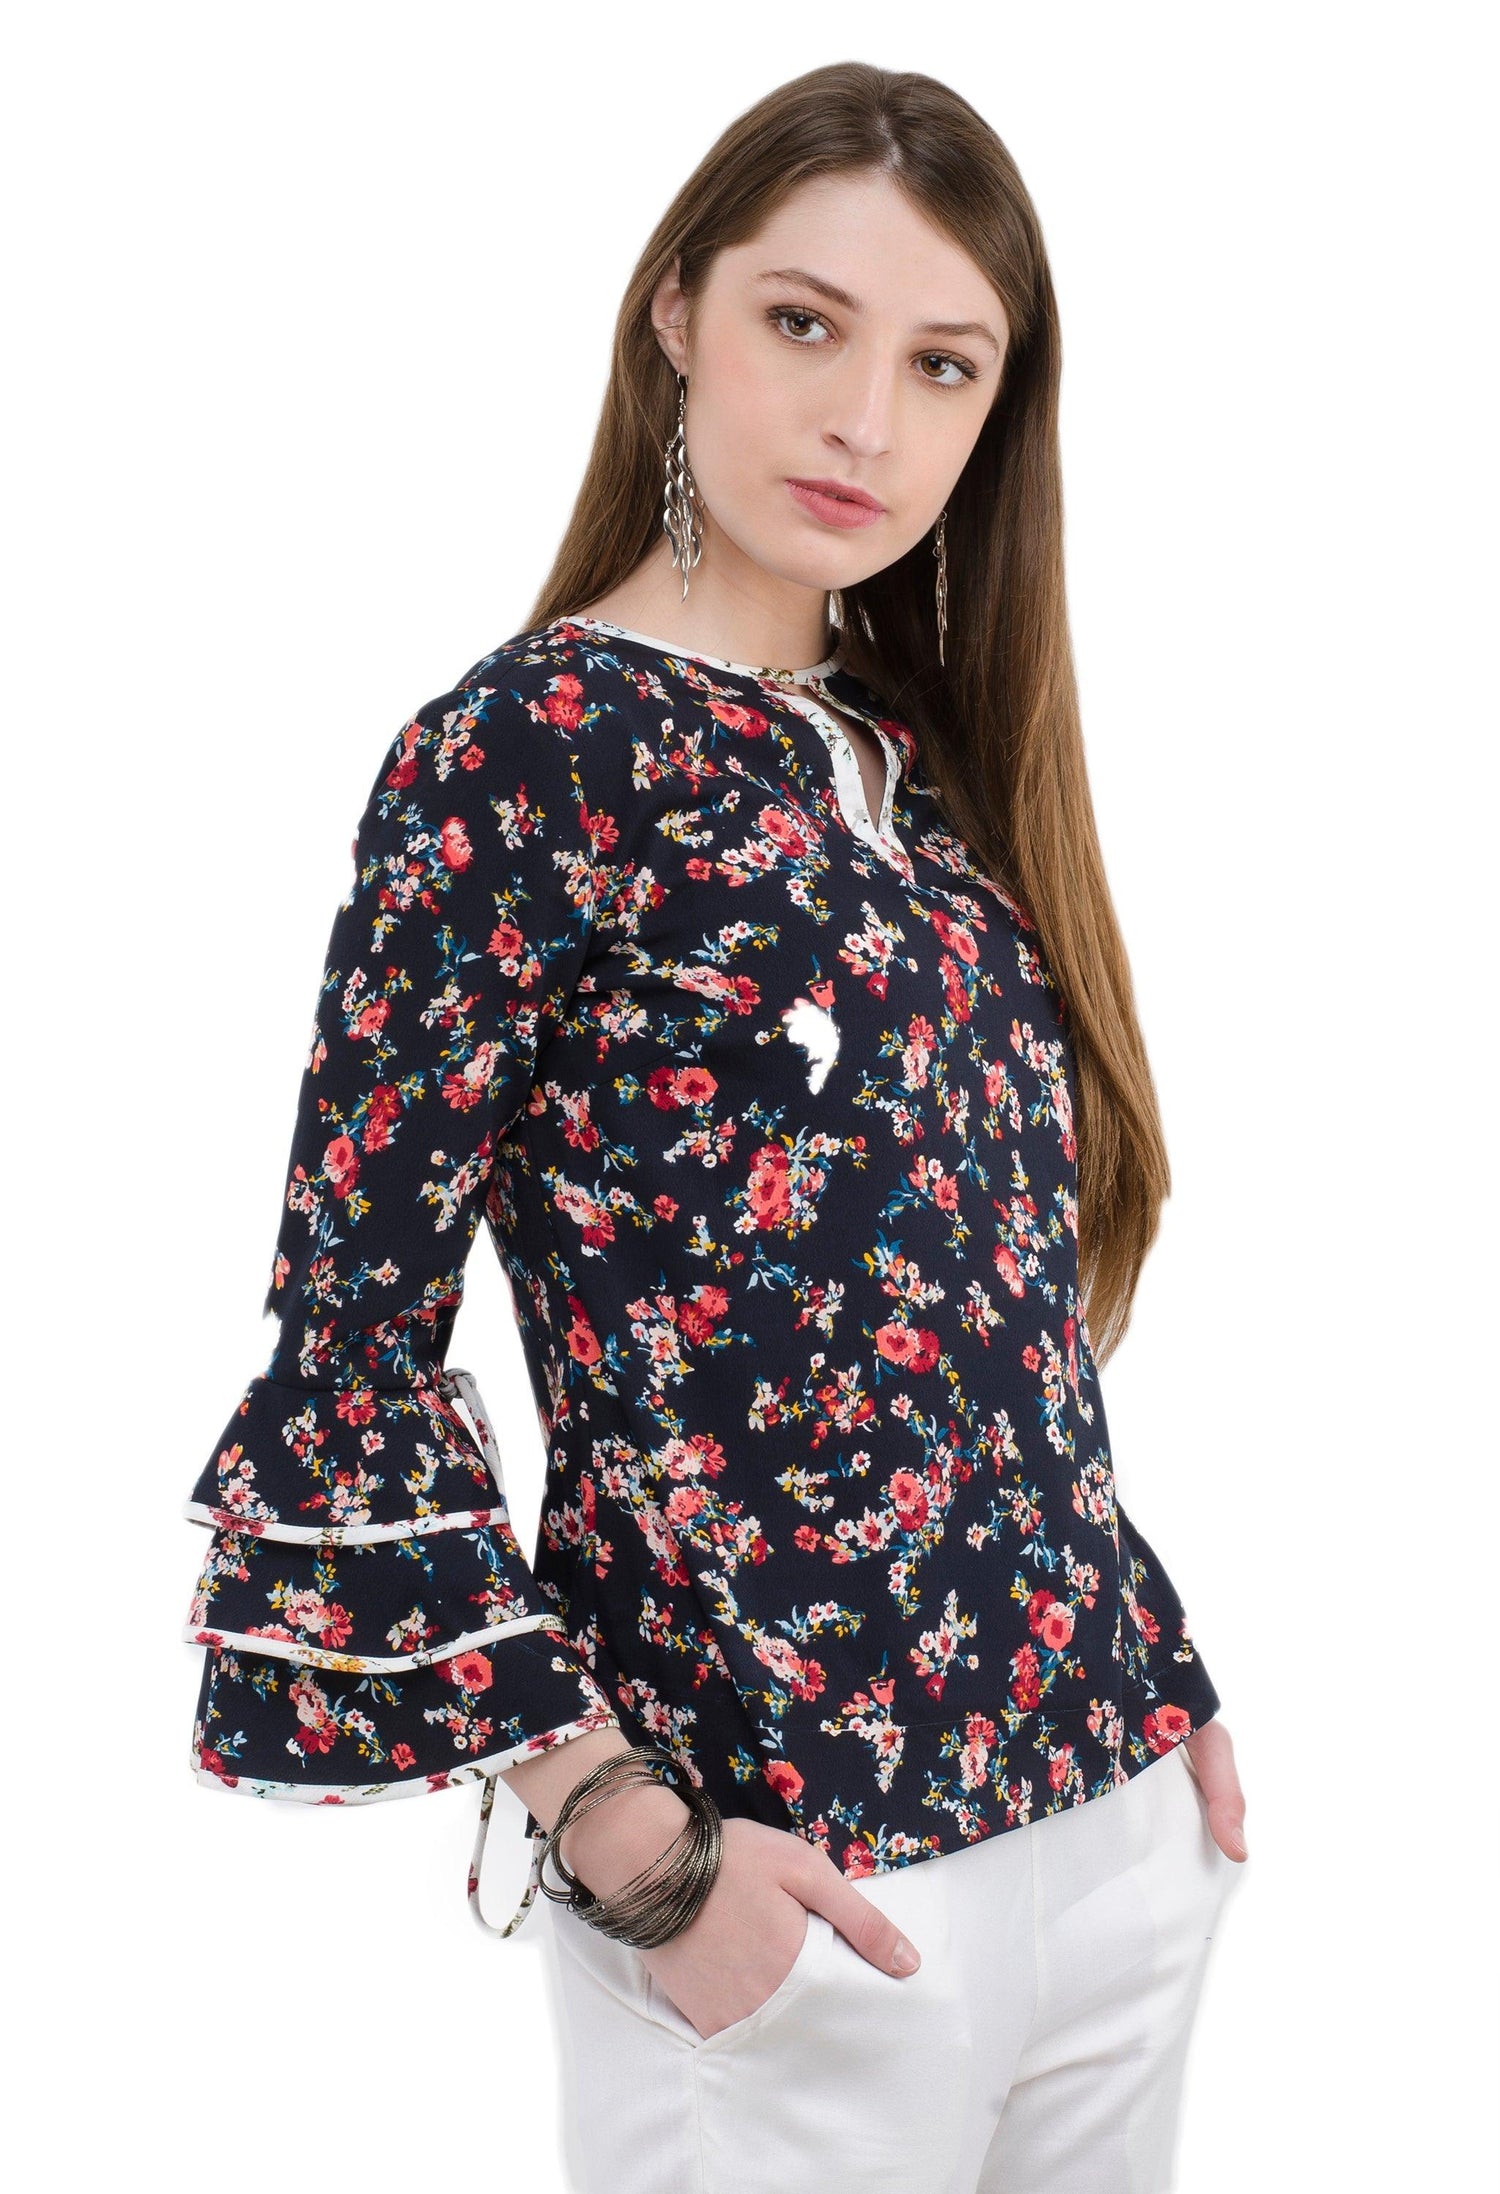 floral printed top - Znxclothing